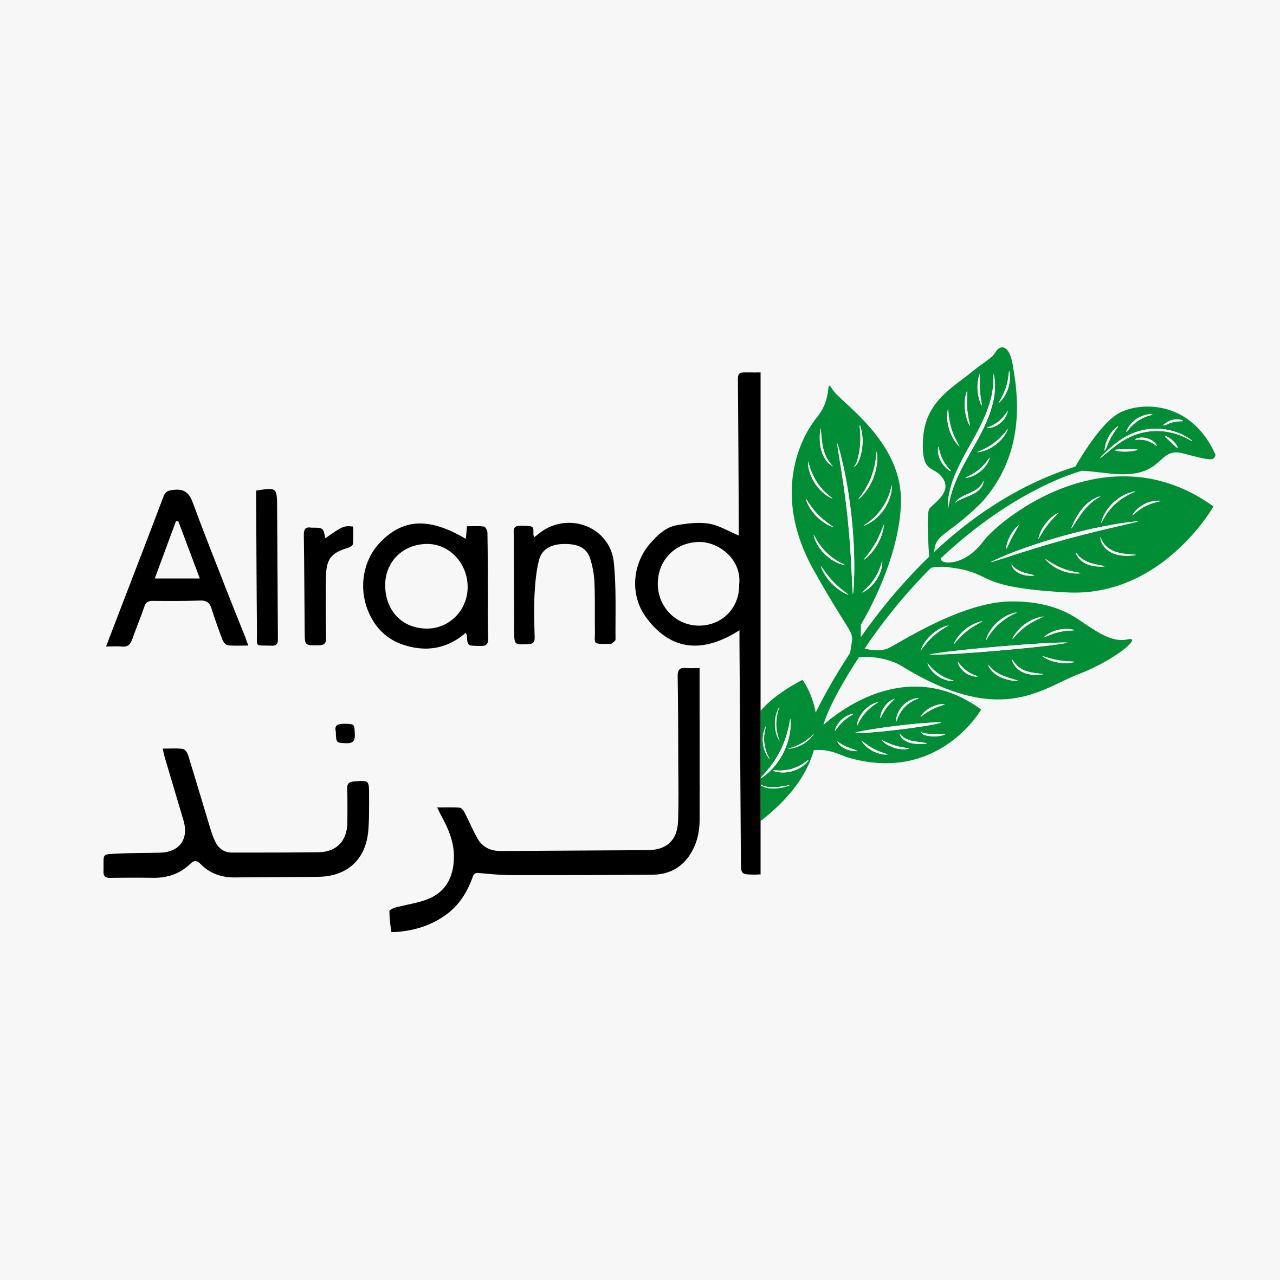 AL-RAND INTRNATIONAL FOR INDUSTRY AND TRADE